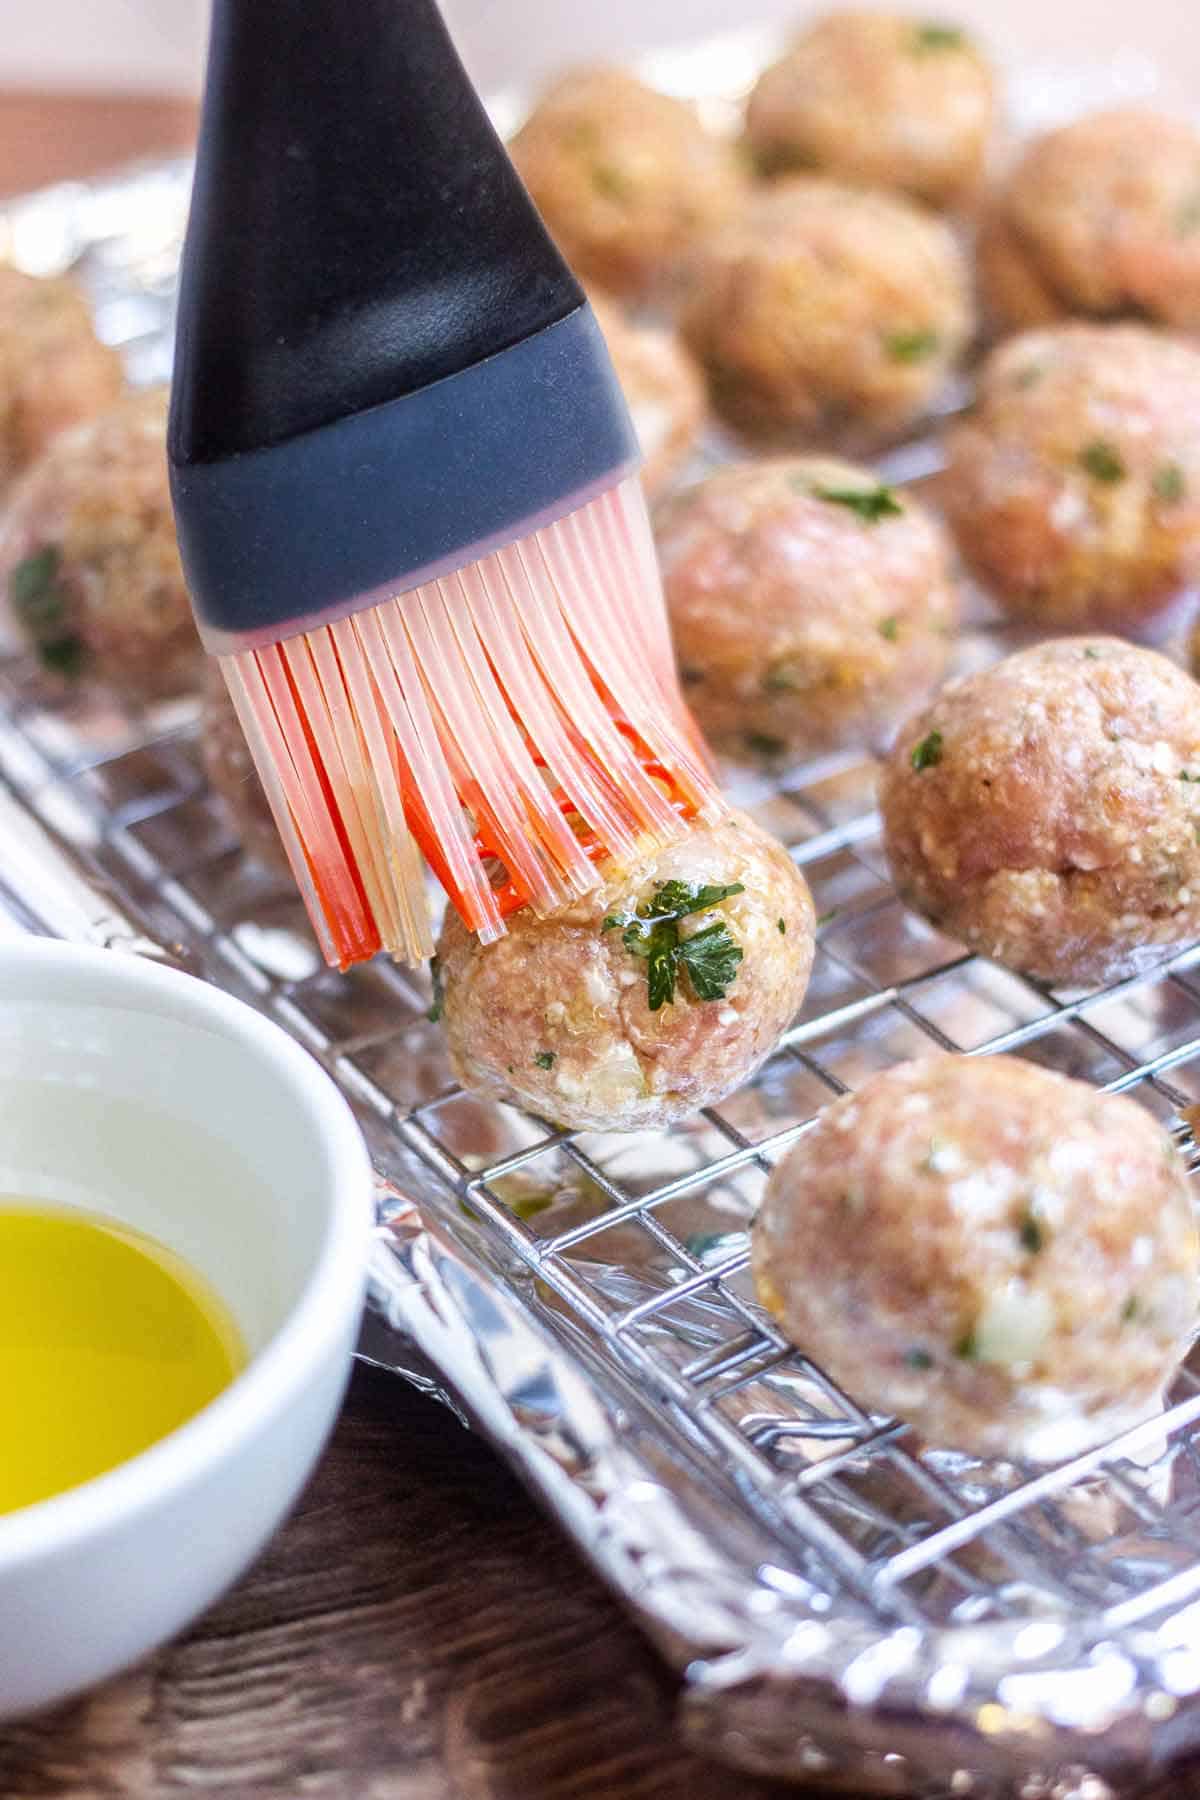 A silicone basting brush is being used to cover raw turkey meatballs with olive oil. The meatballs are on a wire rack on a baking tray that is covered in foil.